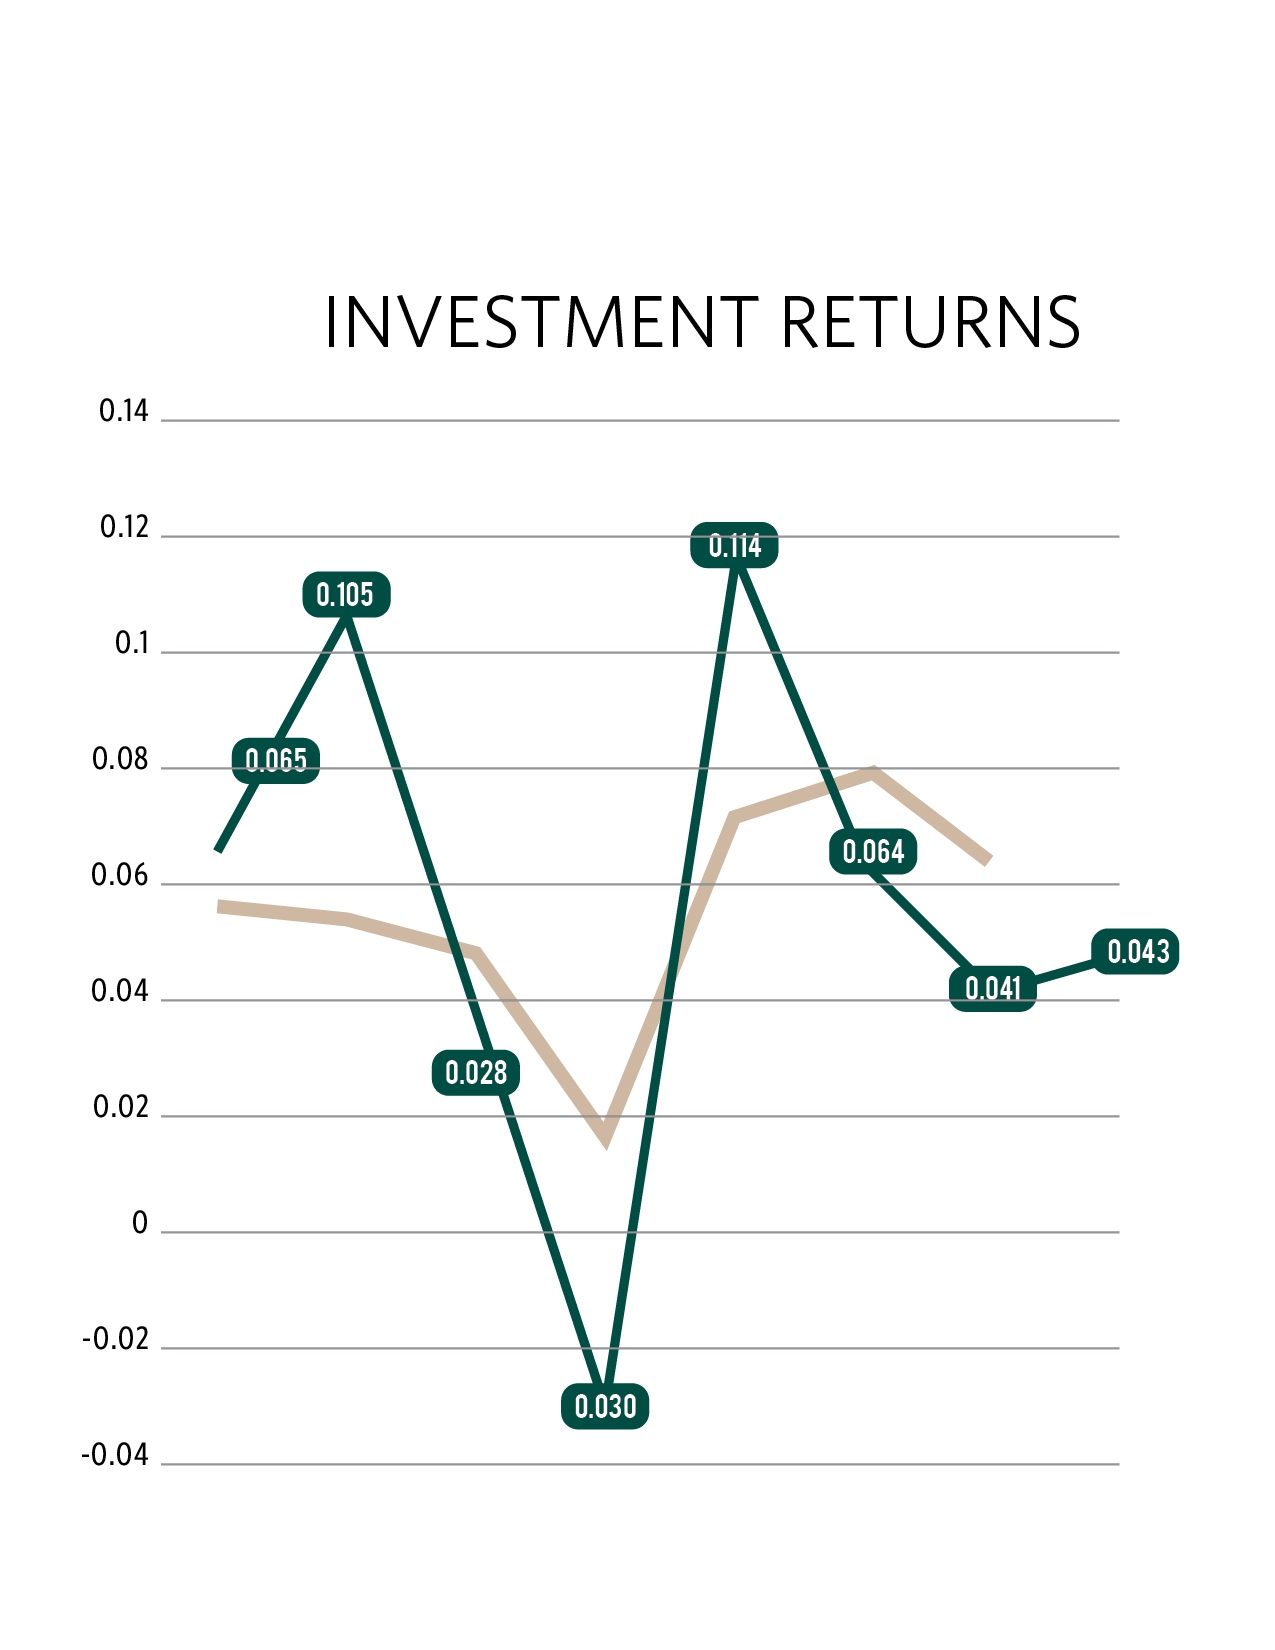 A ine graph showing the investment returns over time. it is currently slightly in decline with 0.043 as the current return rate